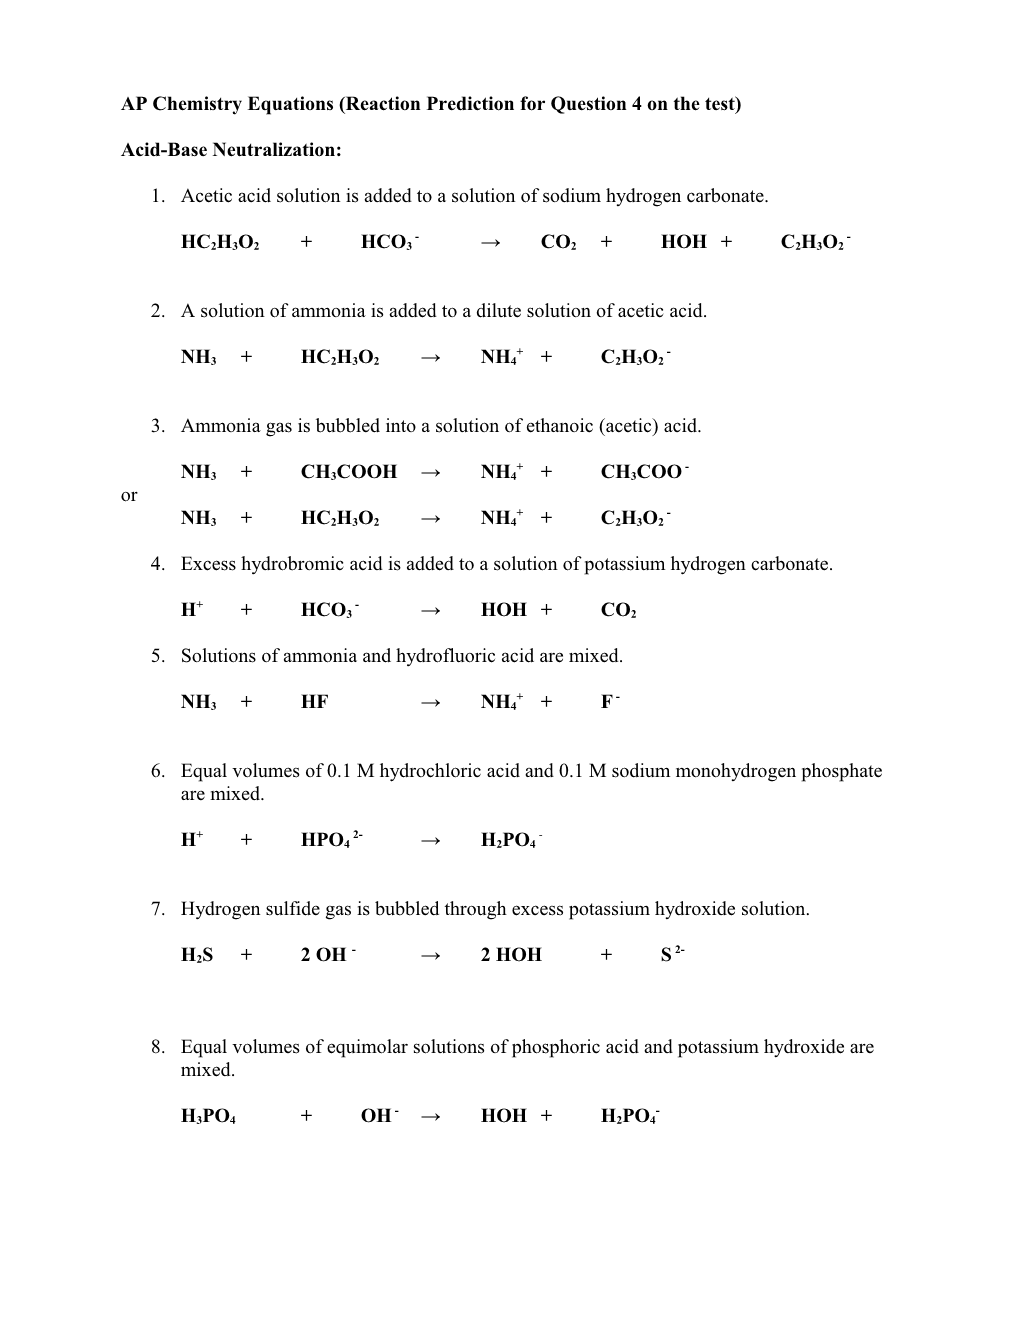 AP Chemistry Equations (Reaction Prediction for Question 4 on the Test)